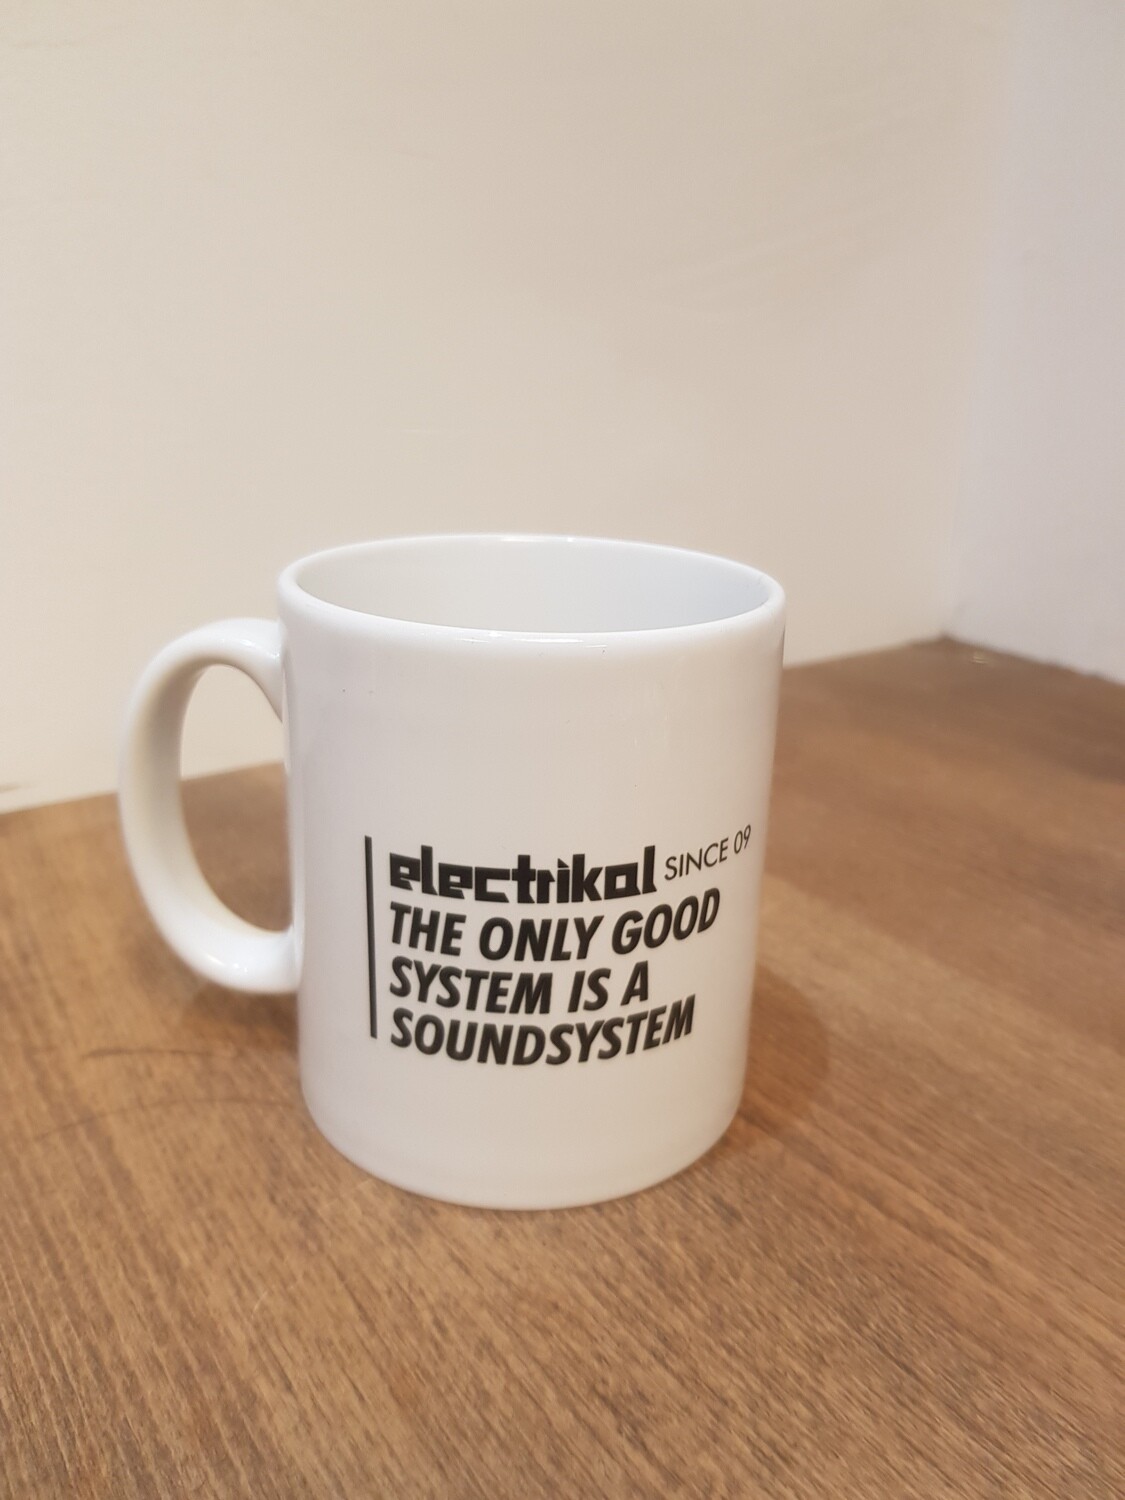 The only good system - Mug